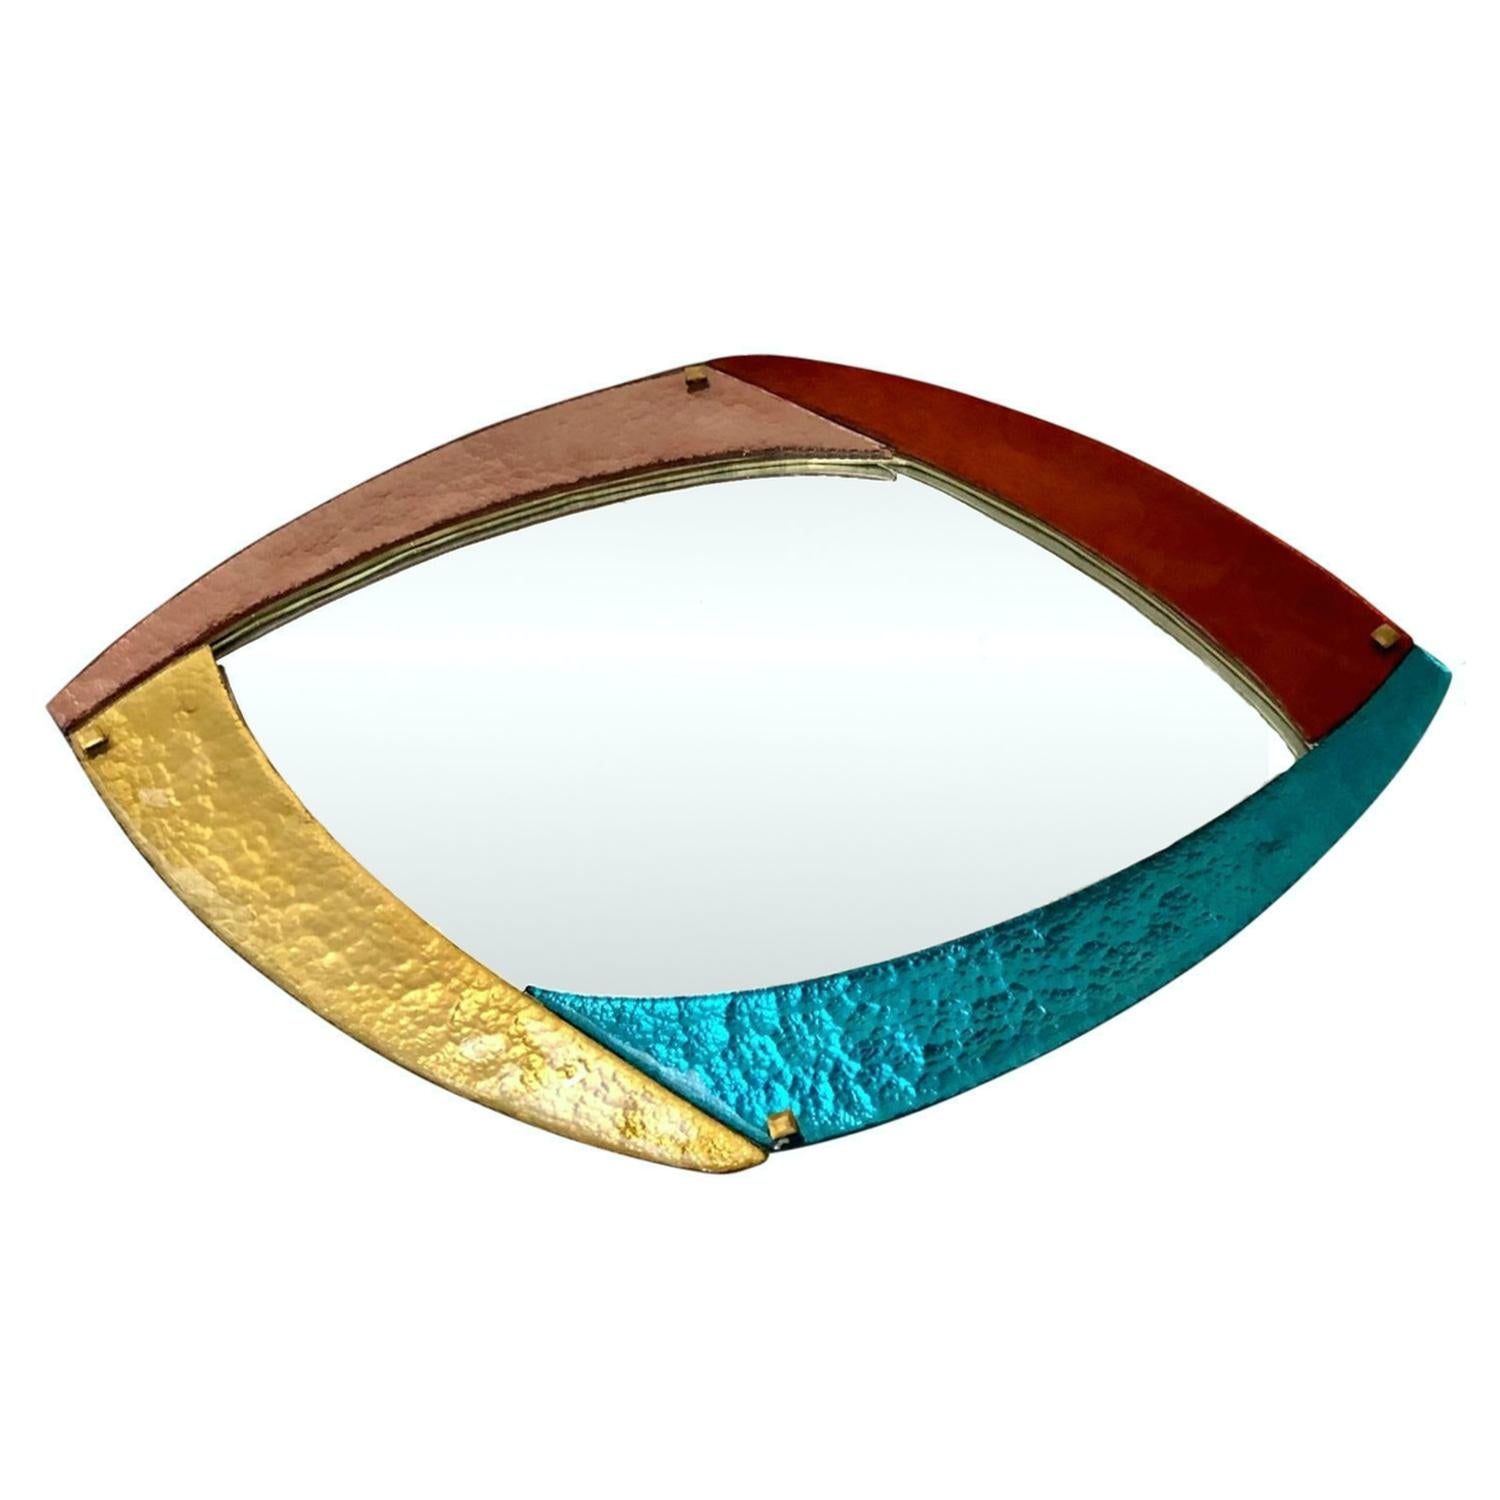 A pair is available now. Contemporary custom-made modern mirror, entirely hand-made in Italy, of organic stylized oval shape, and can be displayed horizontally or vertically. Of unique Memphis-inspired design, this Art glass mirror has 4